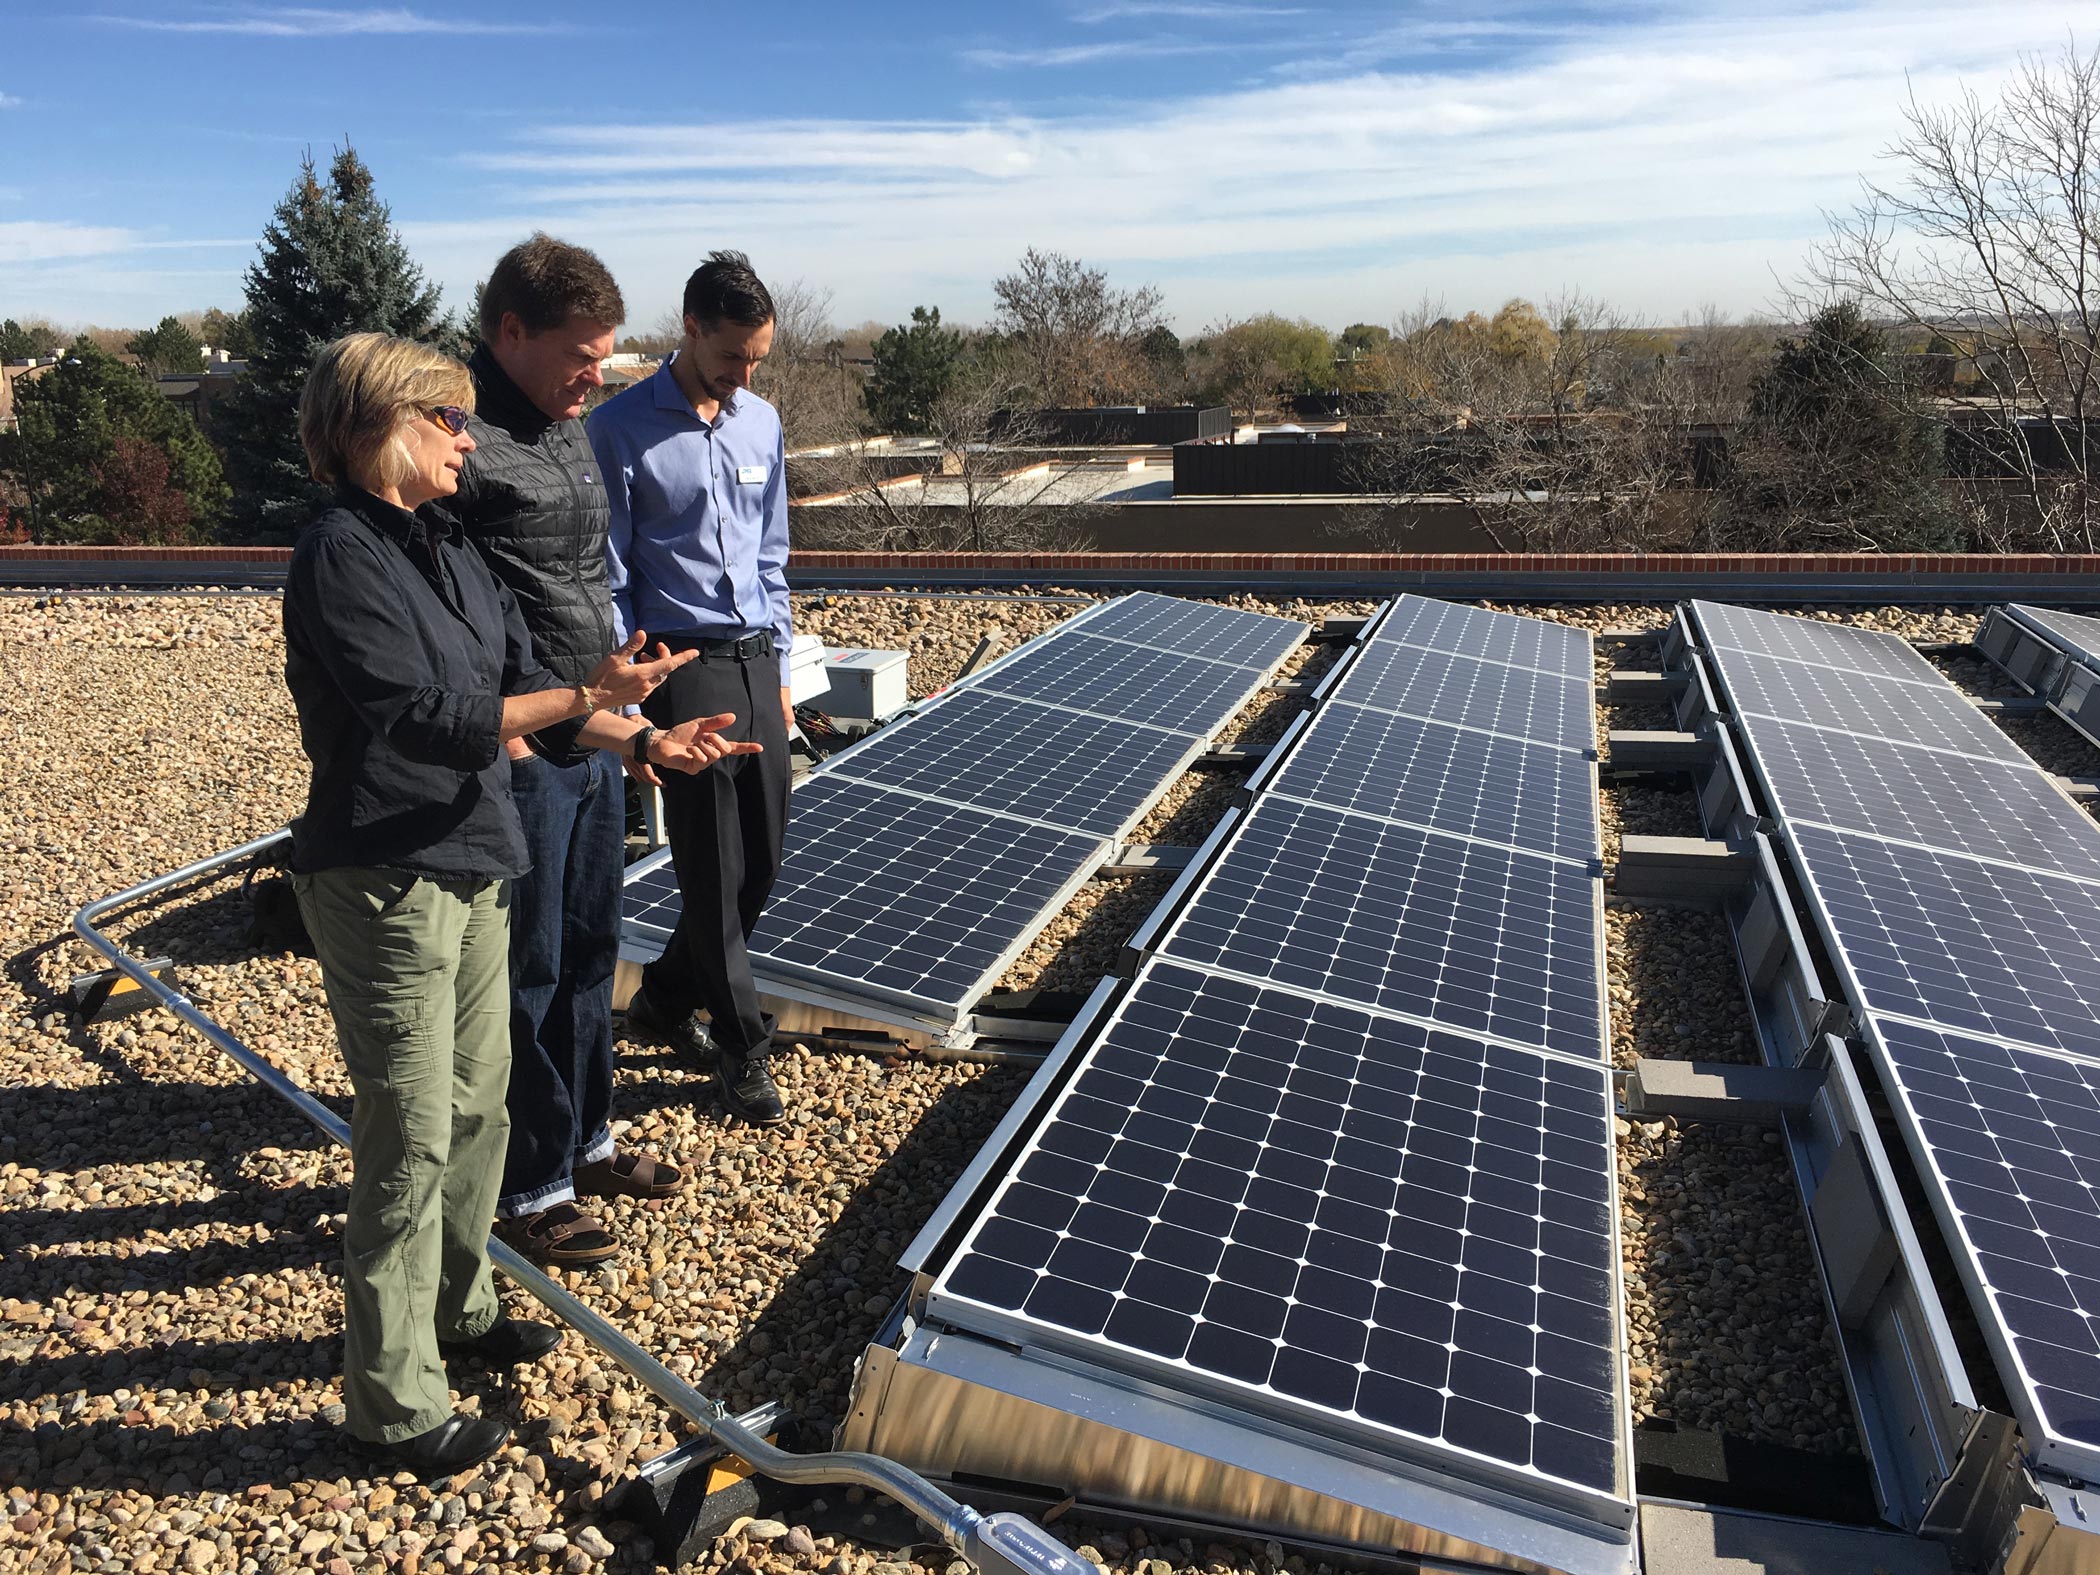 Former Mayor Suzanne Jones Checks out a rooftop solar installation in Boulder